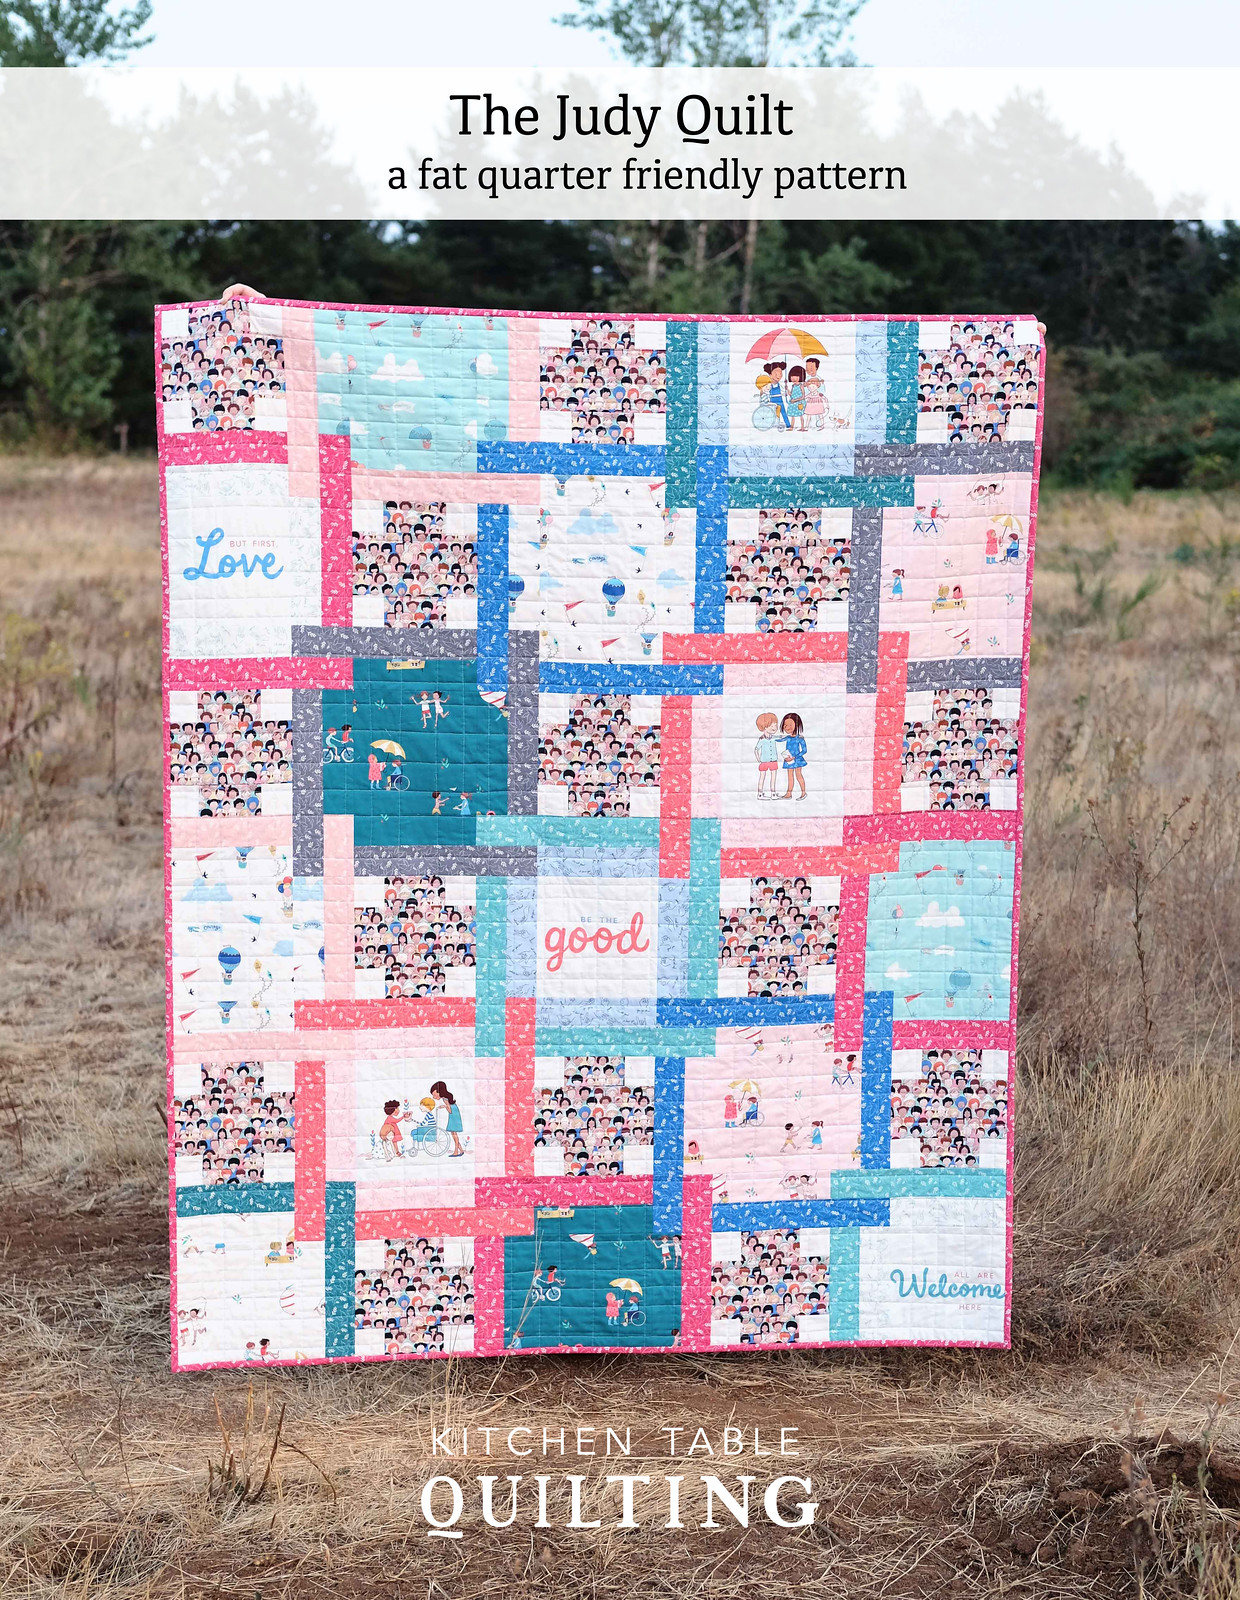 The Judy Quilt Pattern - Kitchen Table Quilting